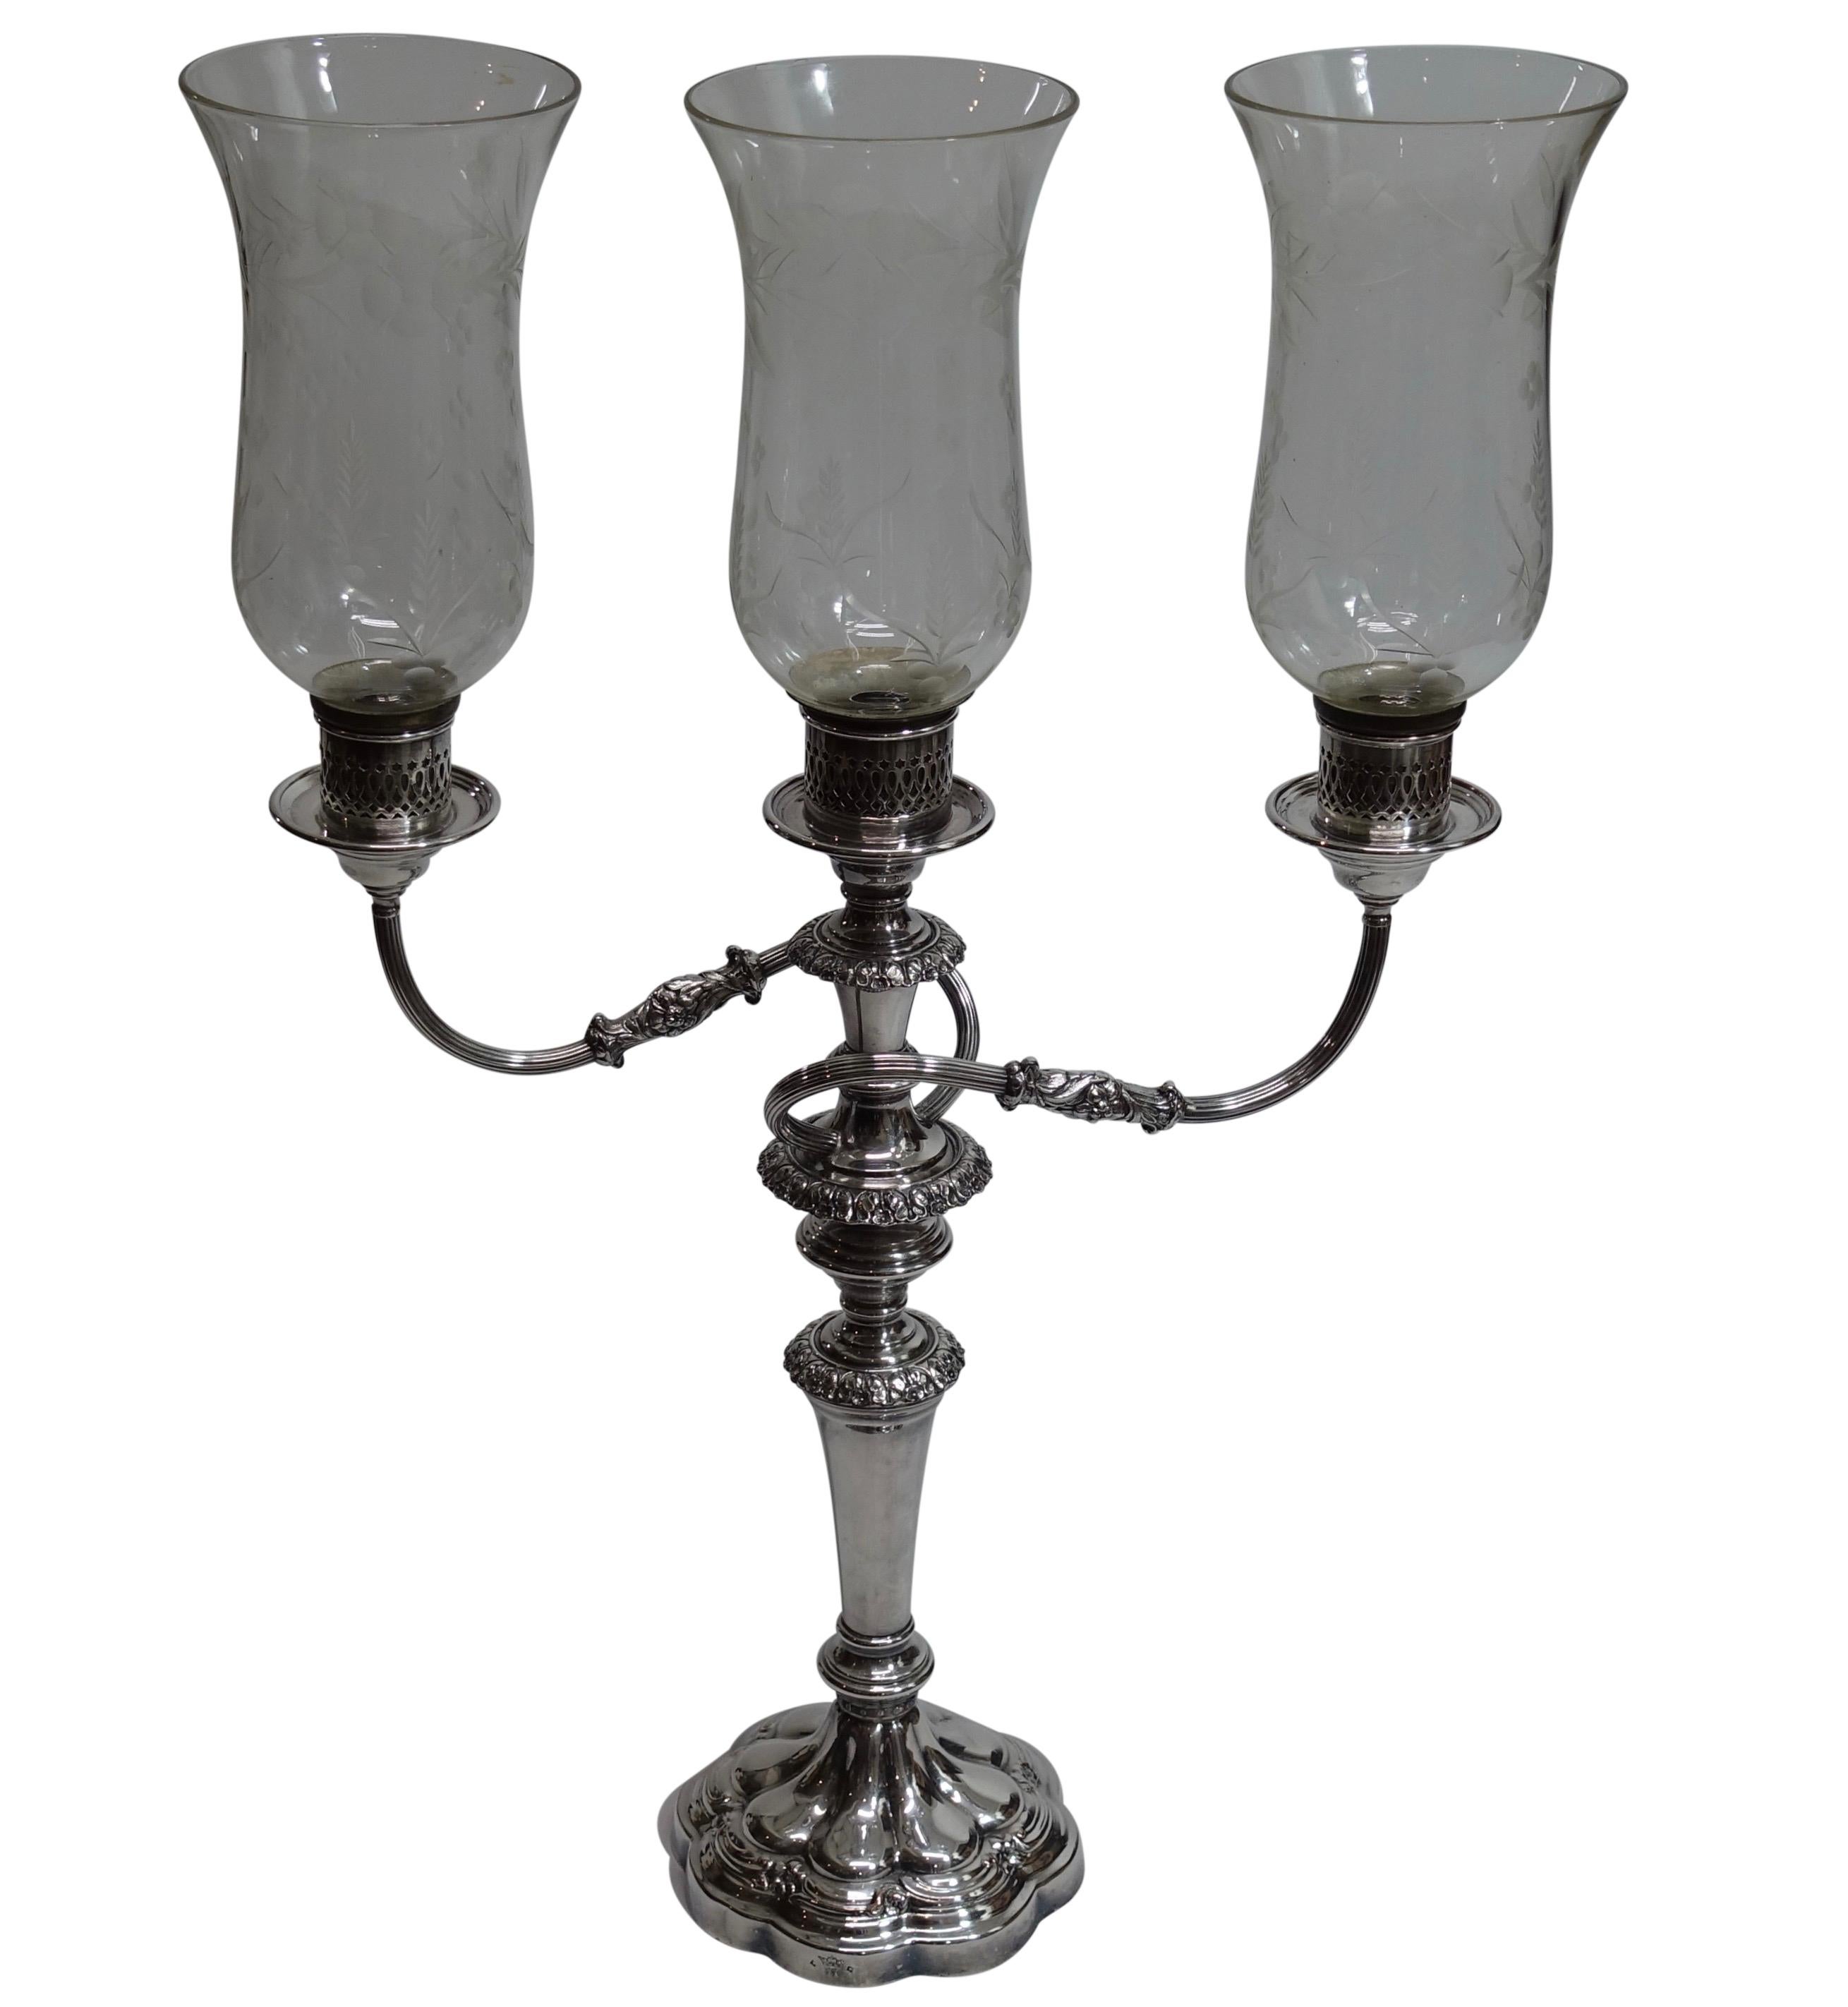 Sheffield Silver Candelabra with Etched Hurricane Shades, English, 19th Century For Sale